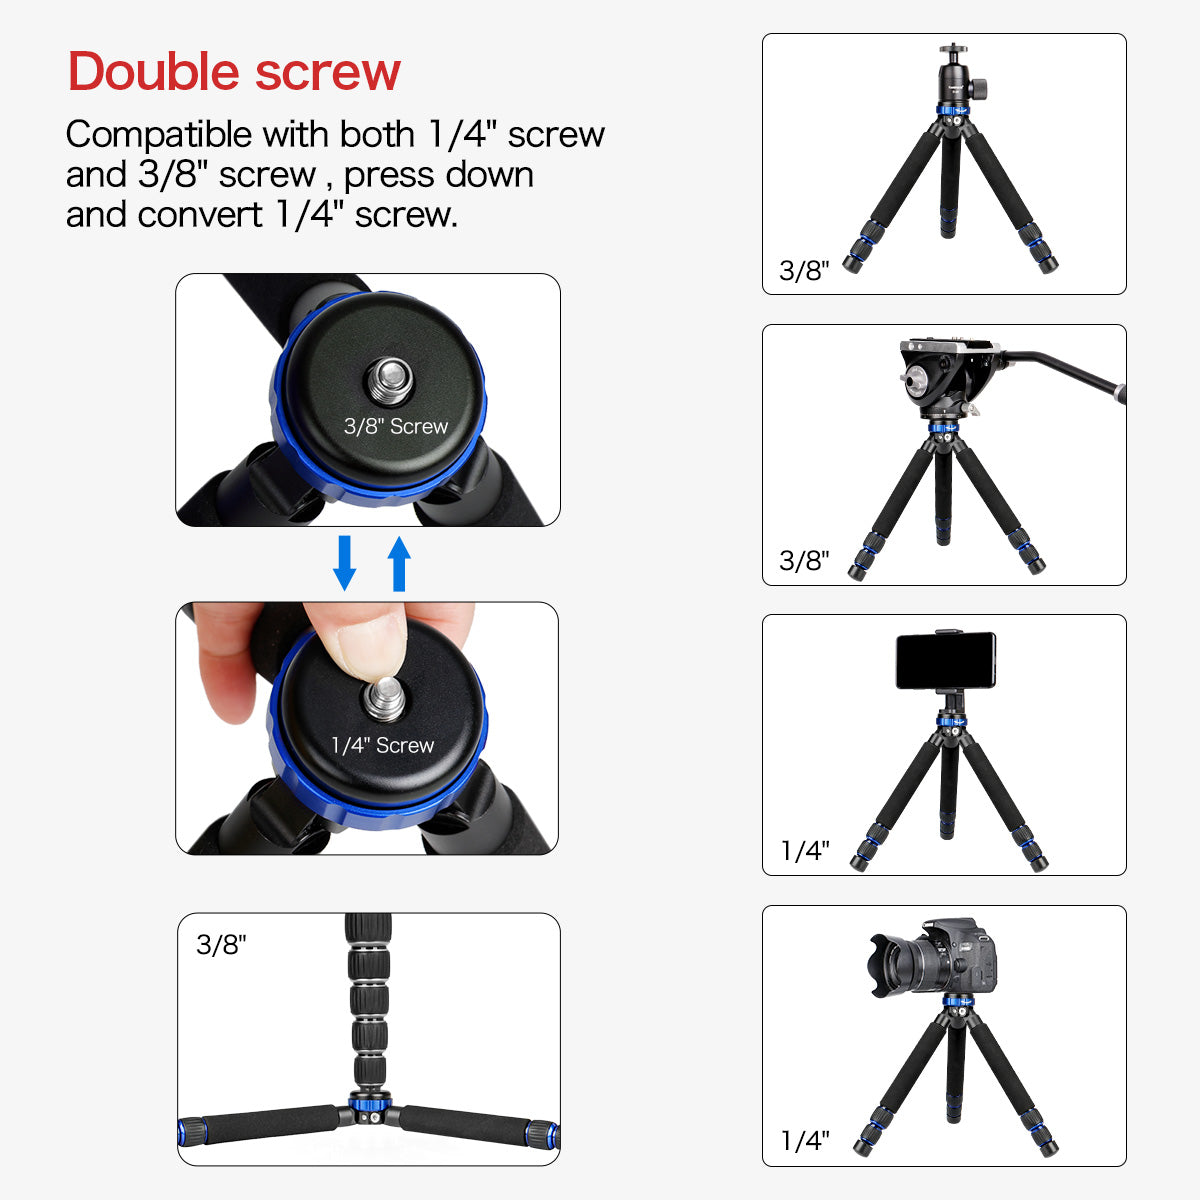 Tabletop Mini Tripod, Travel Portable Tripod with 1/4 and 3/8 Screw Mount and Extendable Leg Design, Max Load 10kg/22lbs,for DSLR Camera,Video Recorder,Cell phone(MT-03)